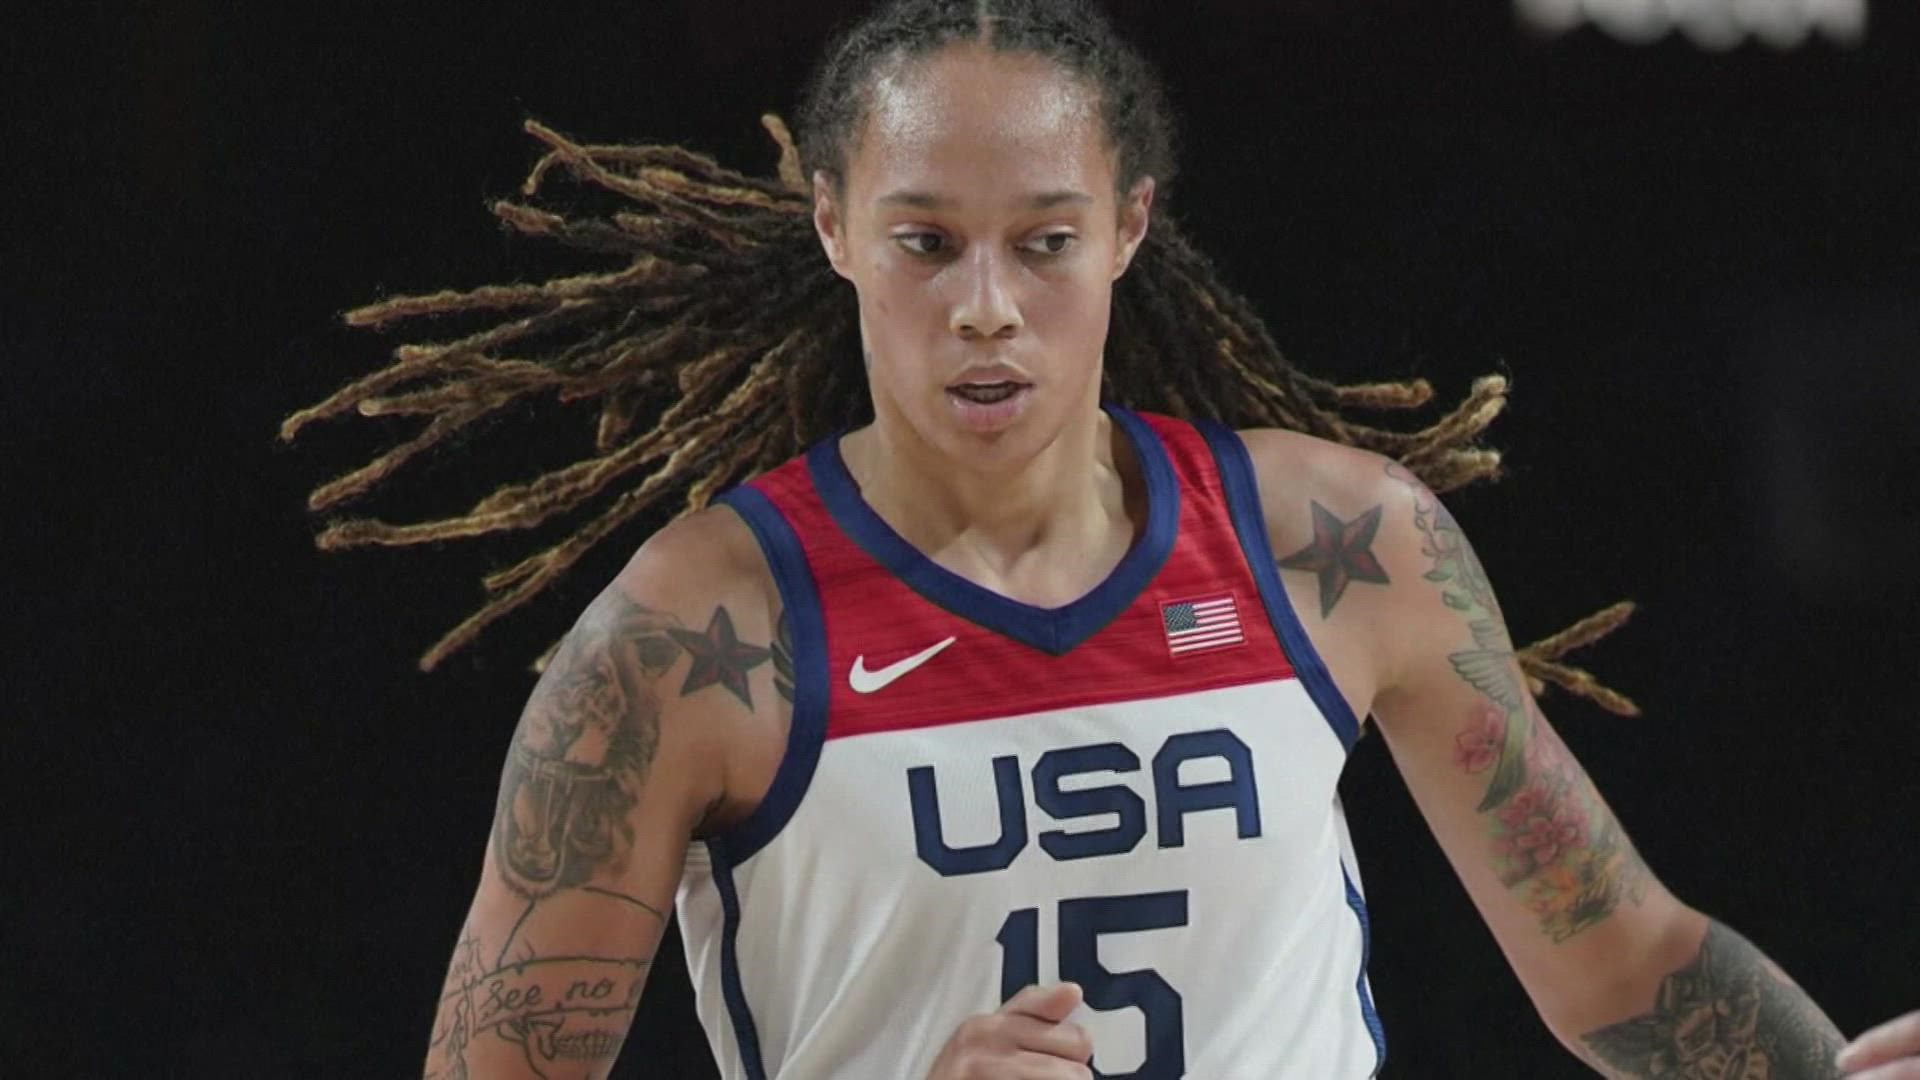 From the WNBA player's teammates to U.S. officials, many are working and hoping for Griner to be released soon.